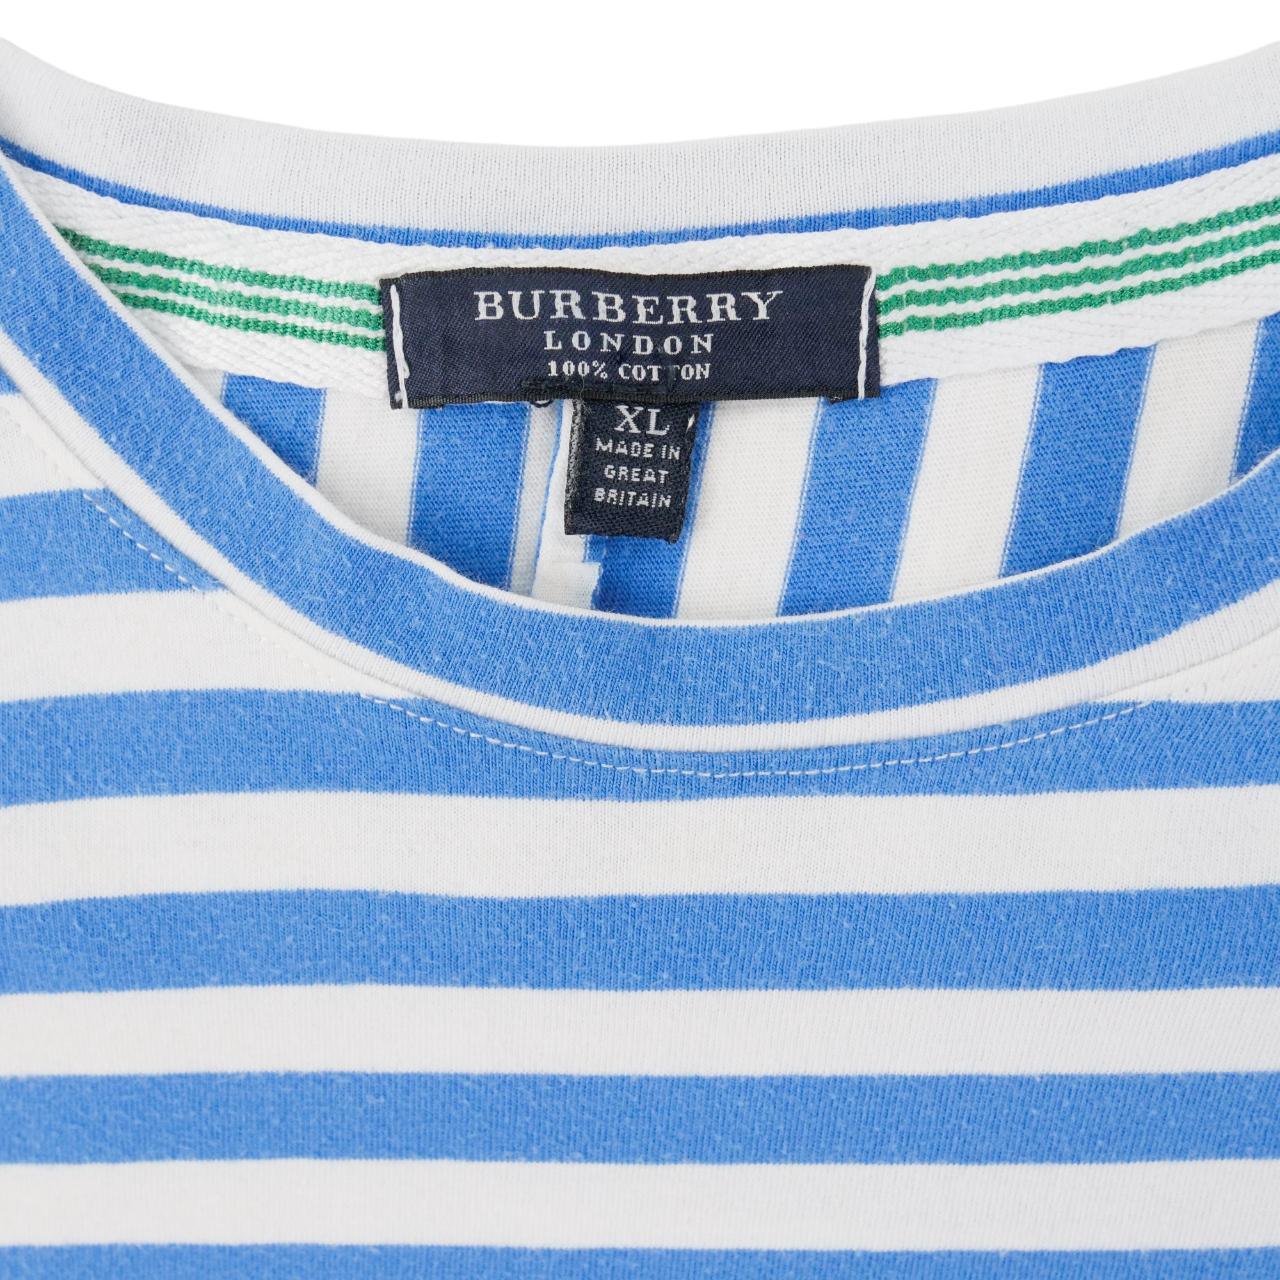 Vintage Burberry Striped T Shirt Size M - Known Source